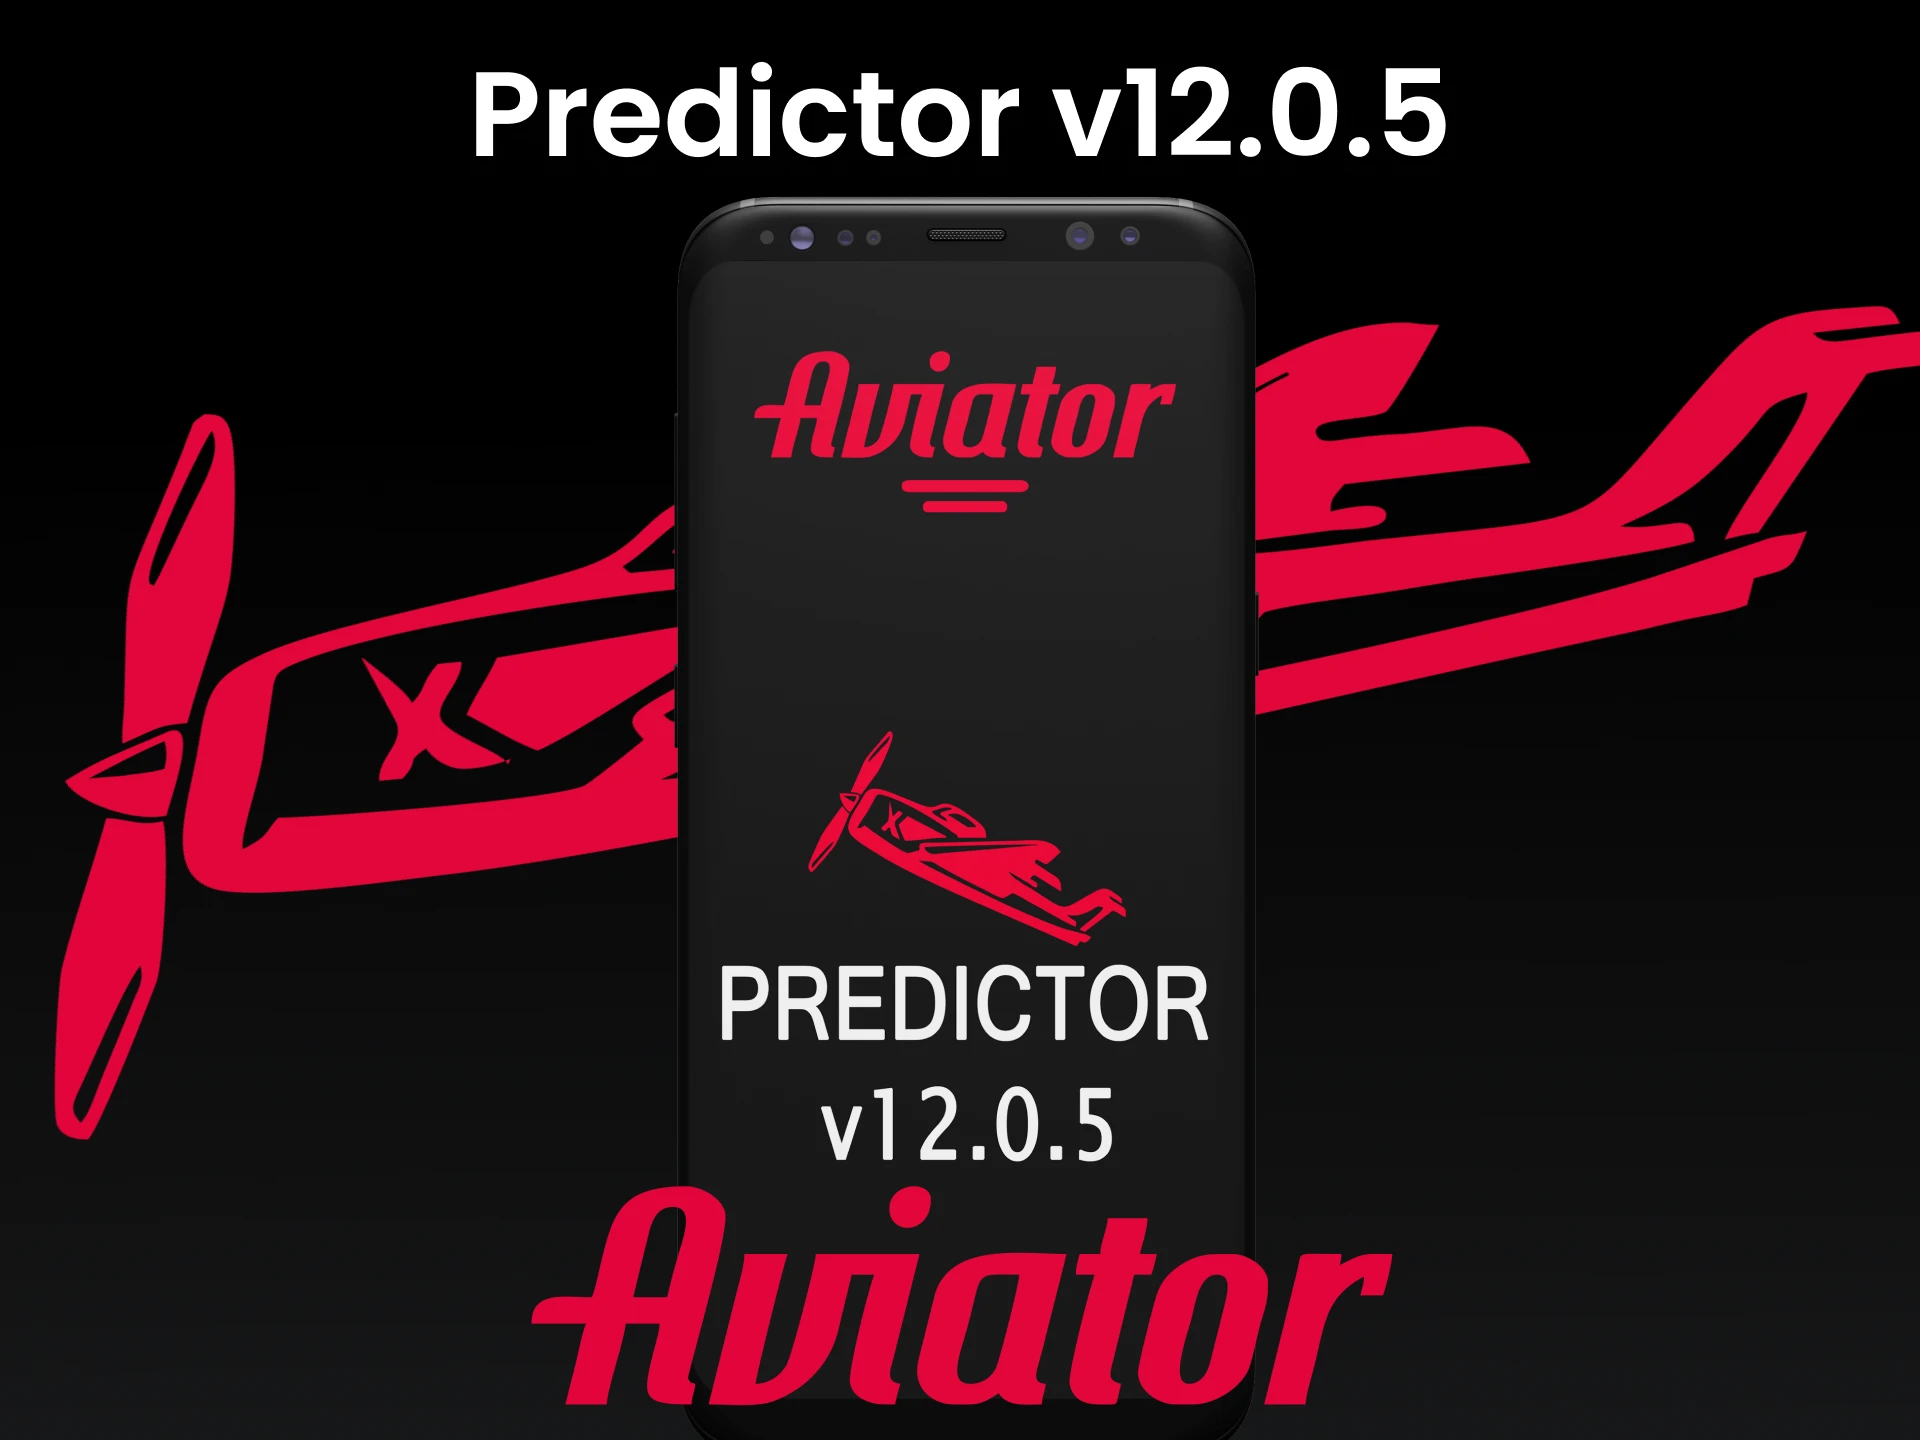 We will talk about Predictor v12.0.5 for Aviator.